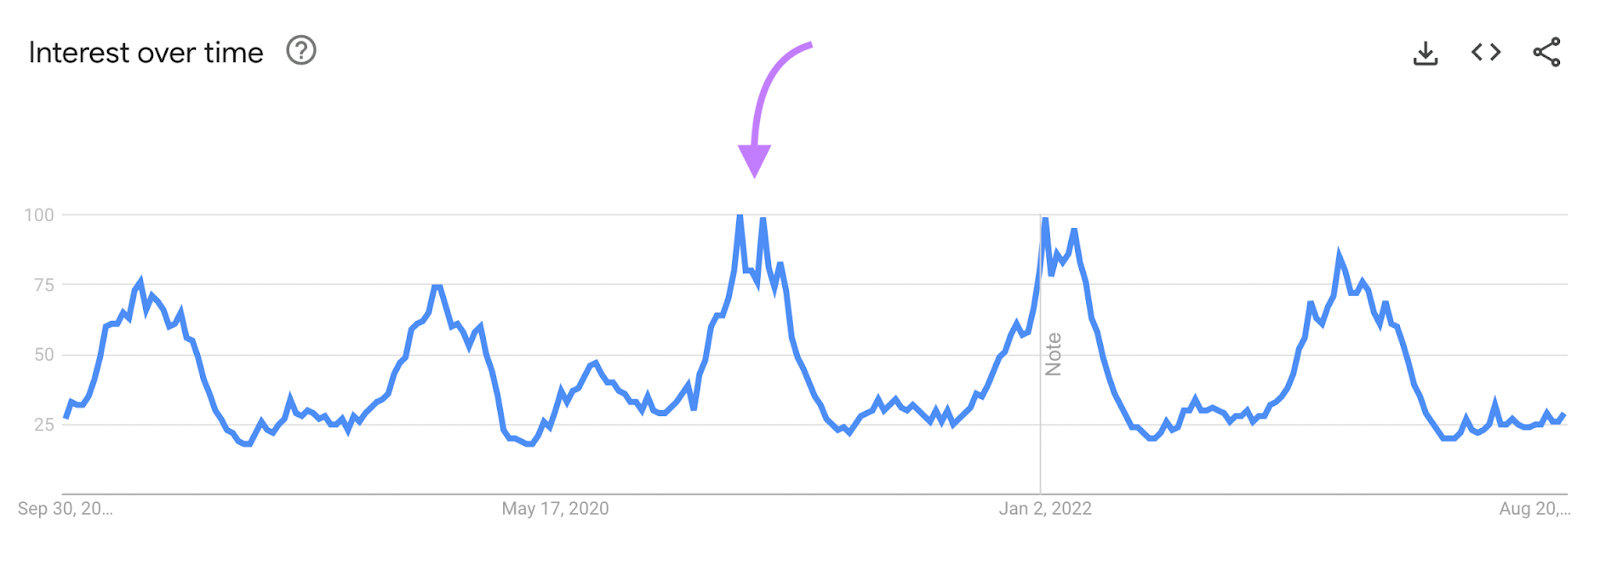 "Interest over time" graph for “skis” in Google Trends